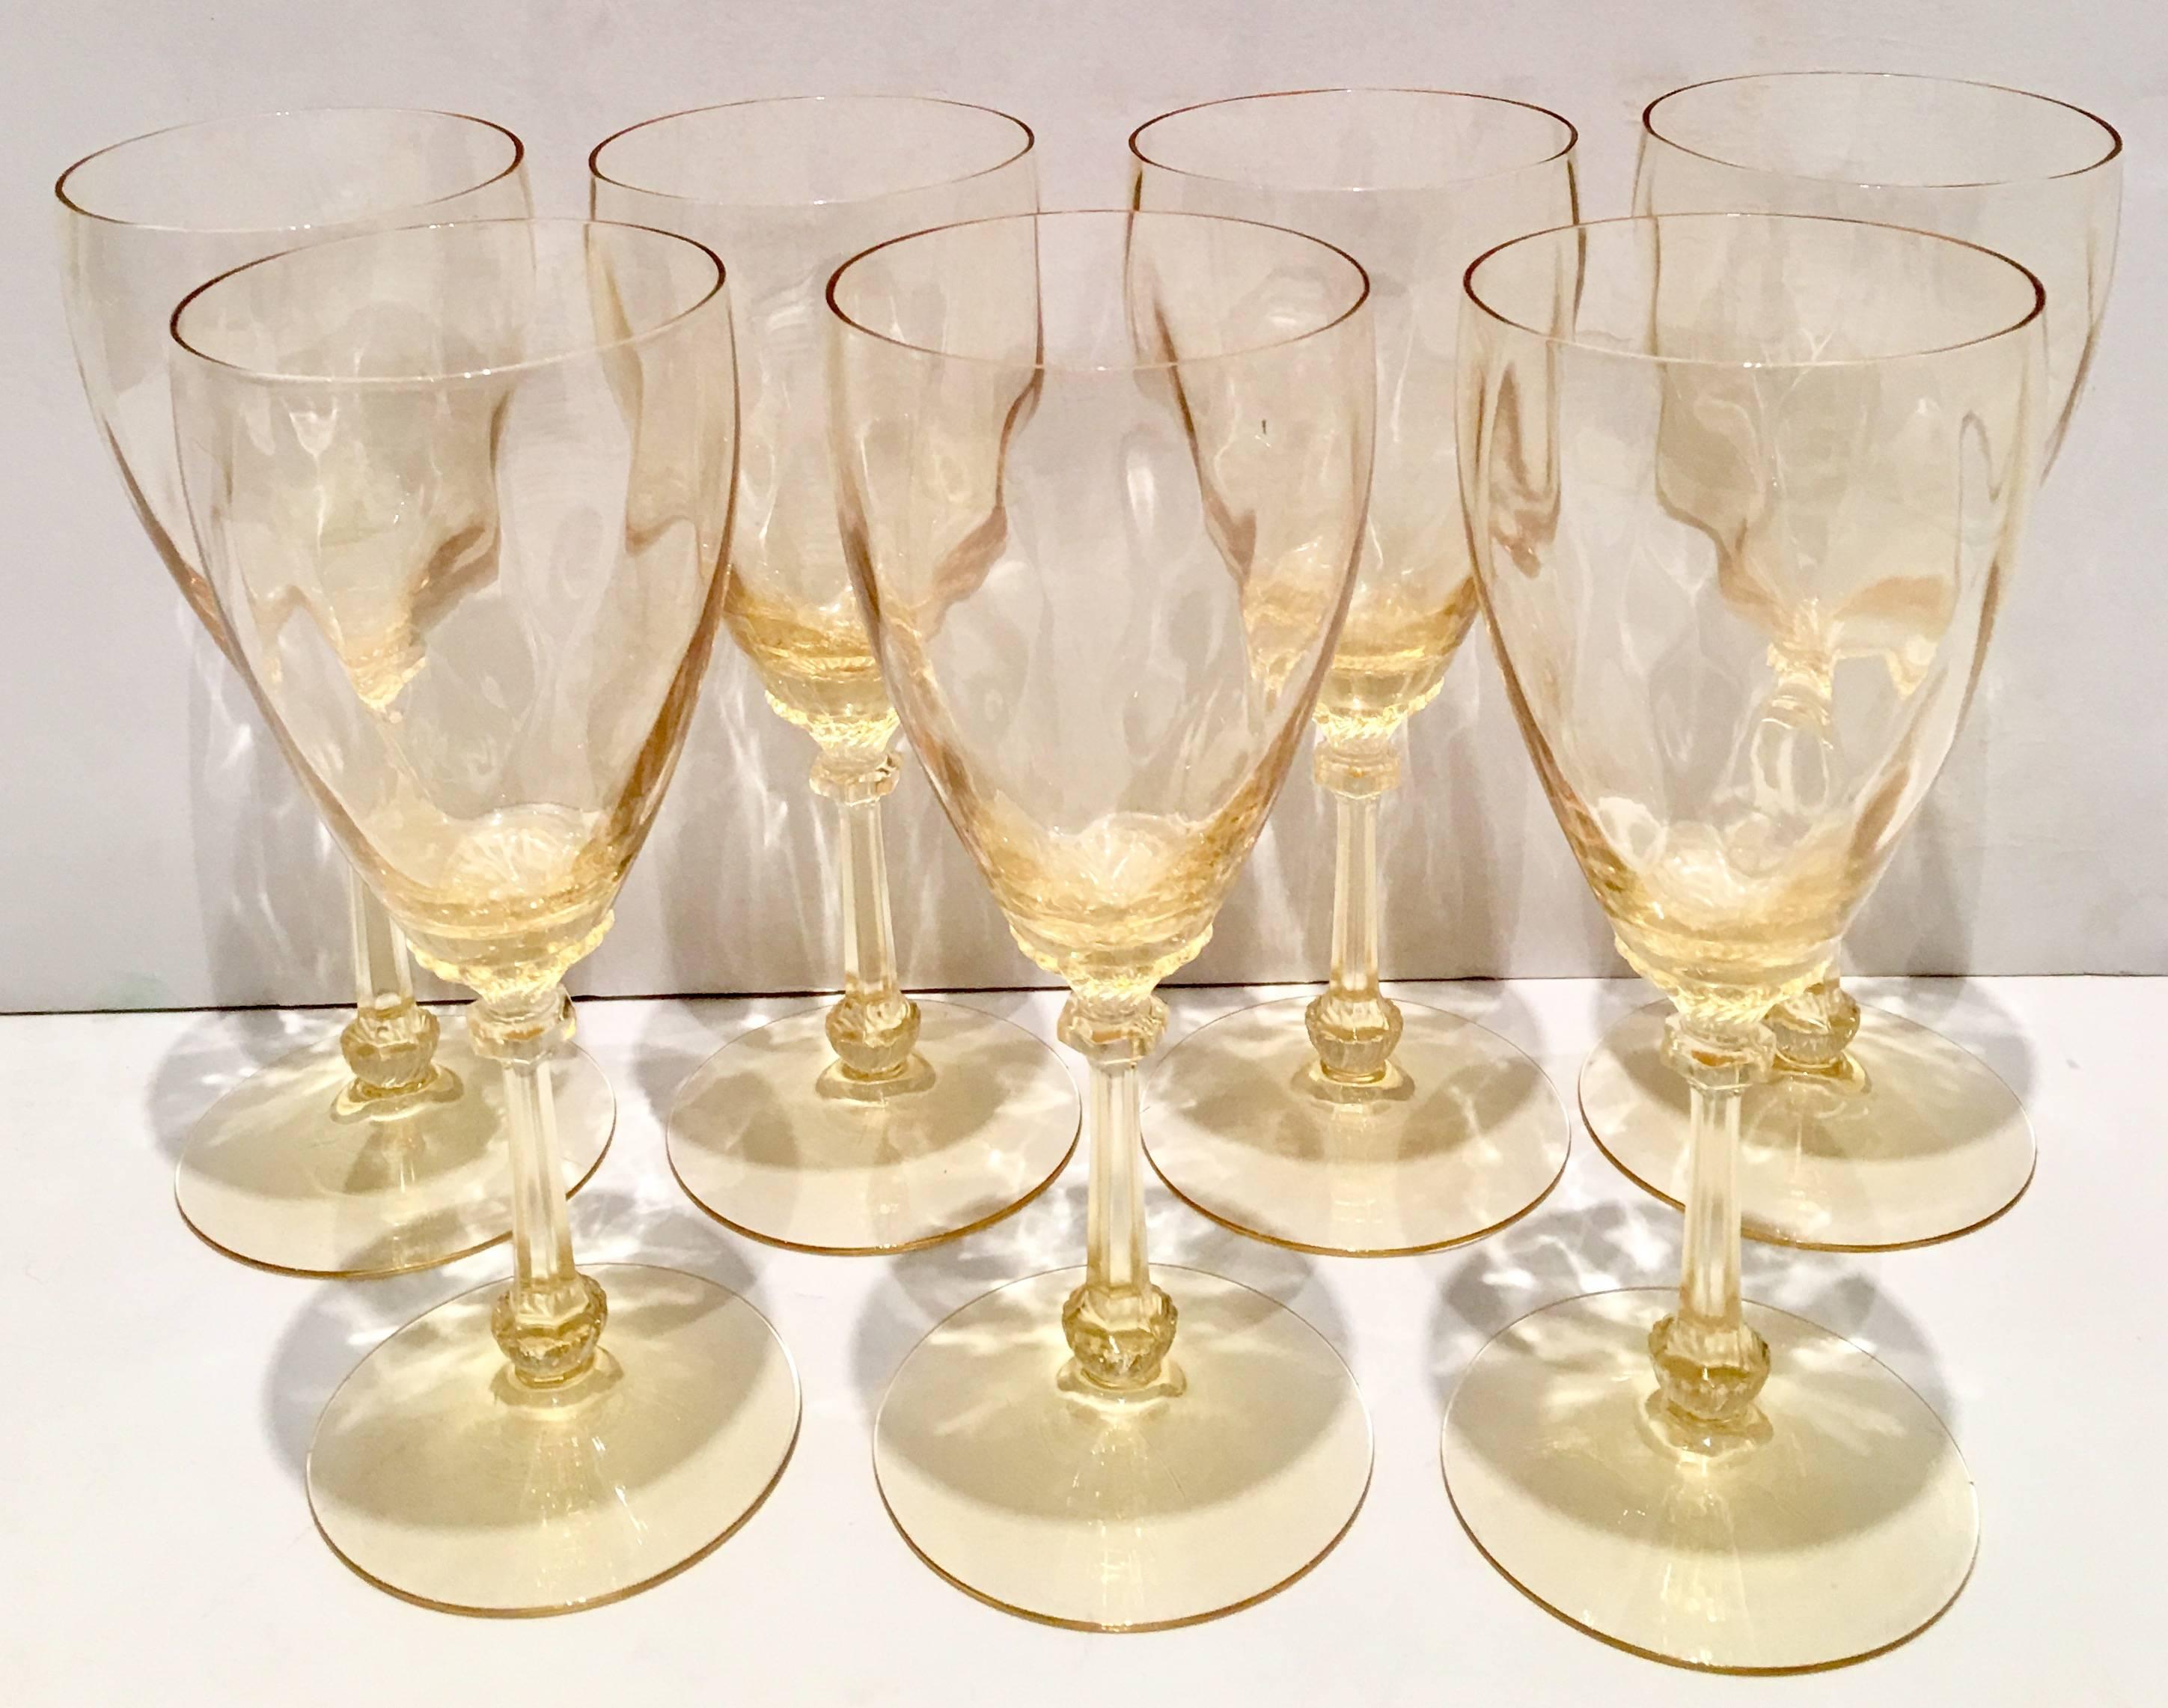 Mid-20th century yellow depression glass set of seven stem glasses. Pattern features a optic bowl and cut stem.